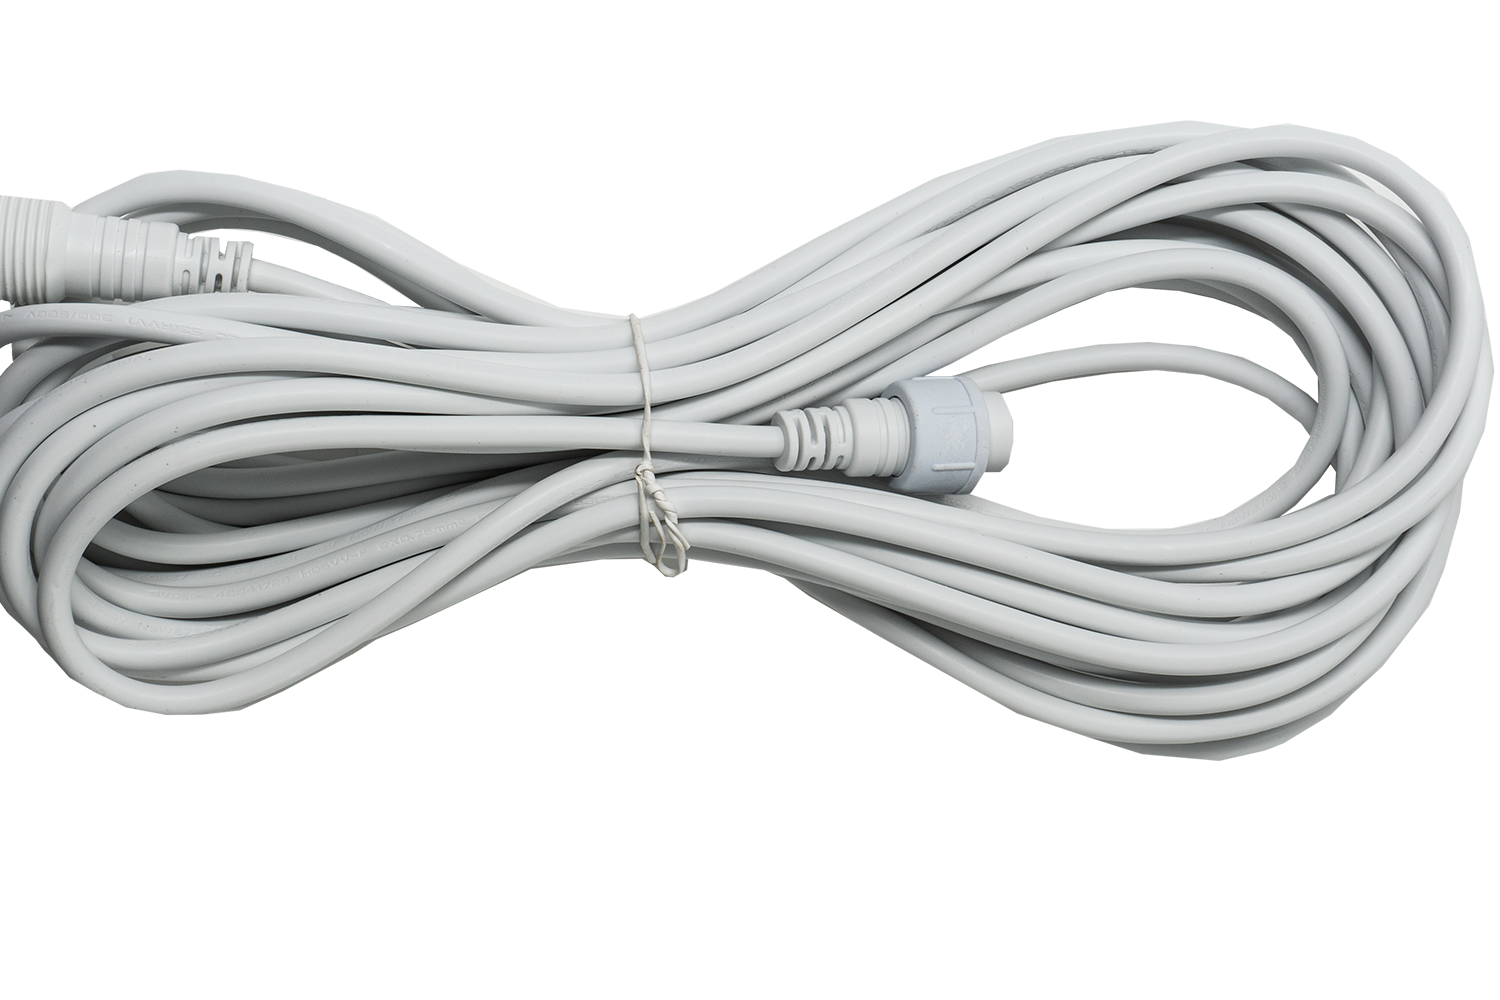 FESEX10WH - Festoon Extension 10m White side view 